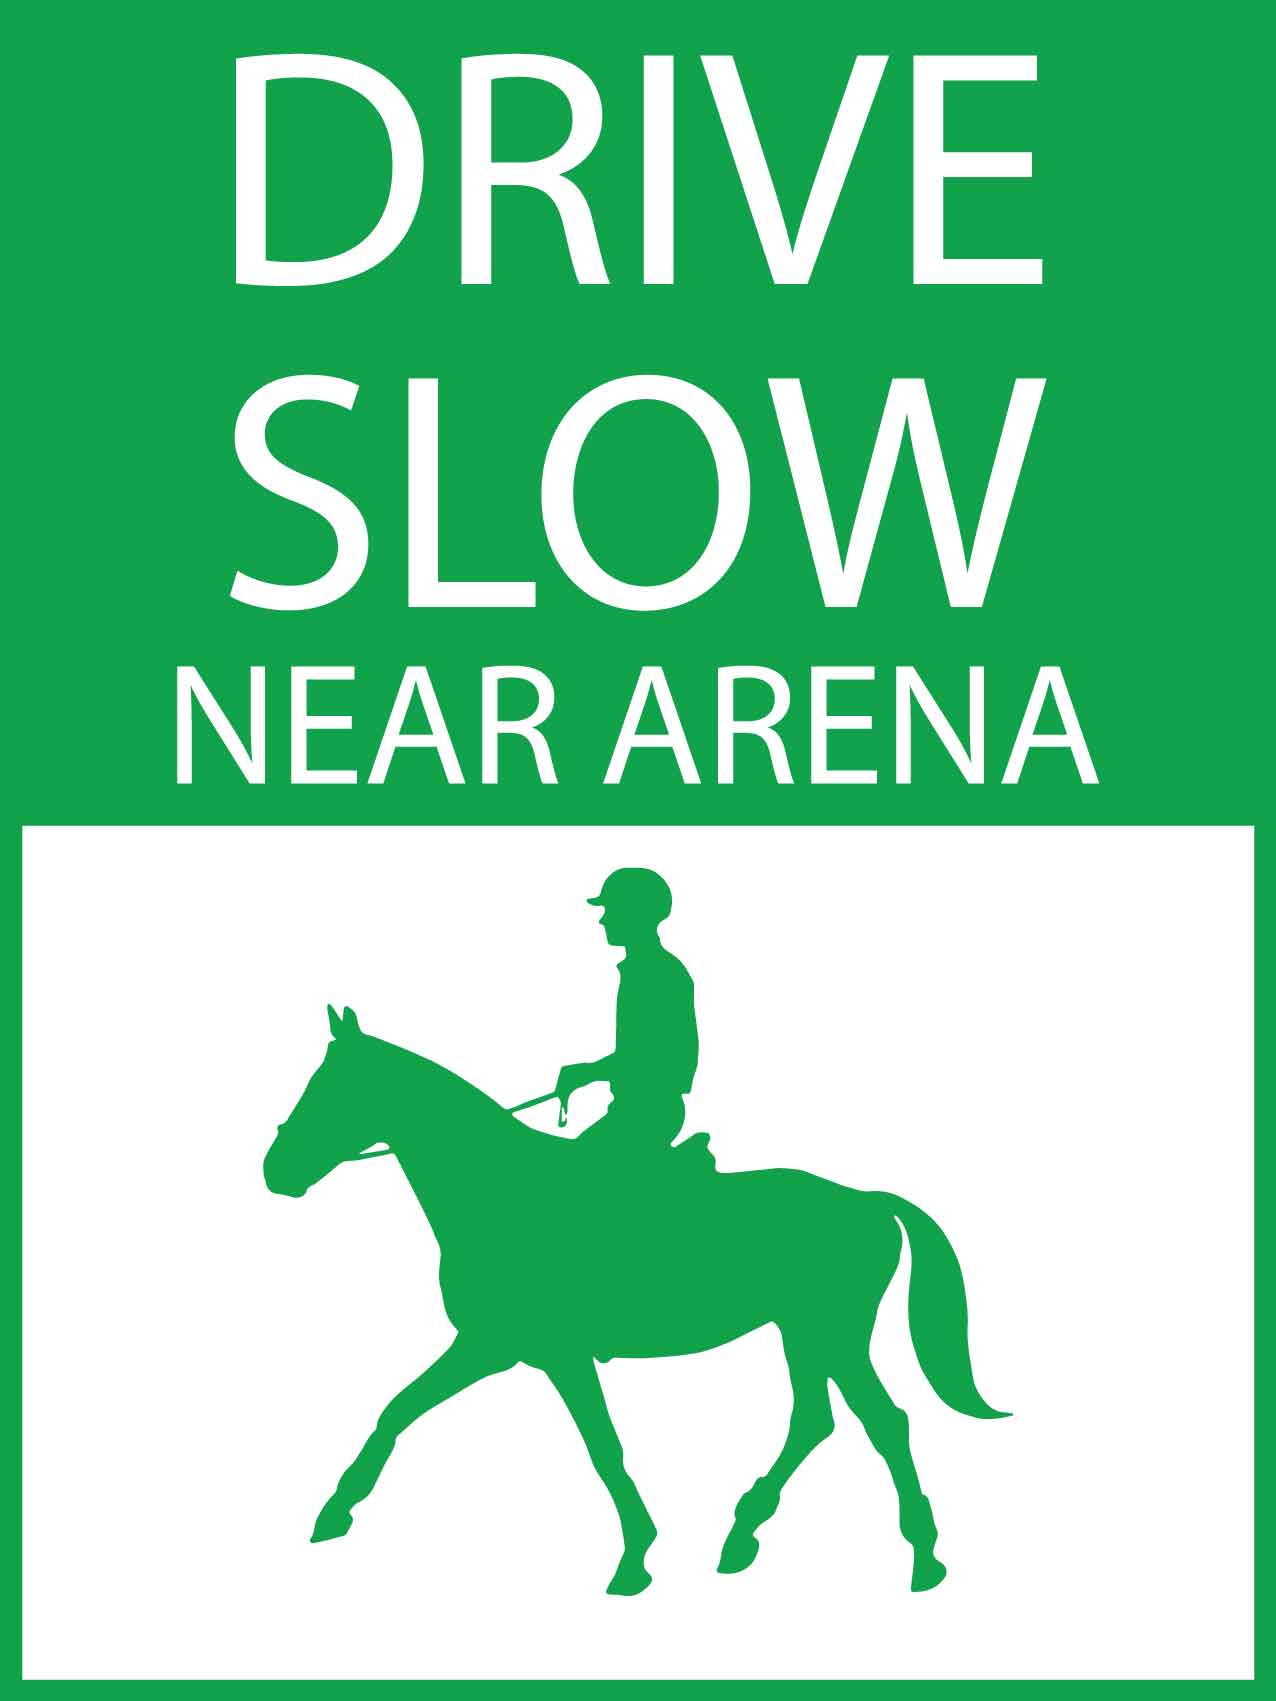 Drive Slow Near Arena Sign